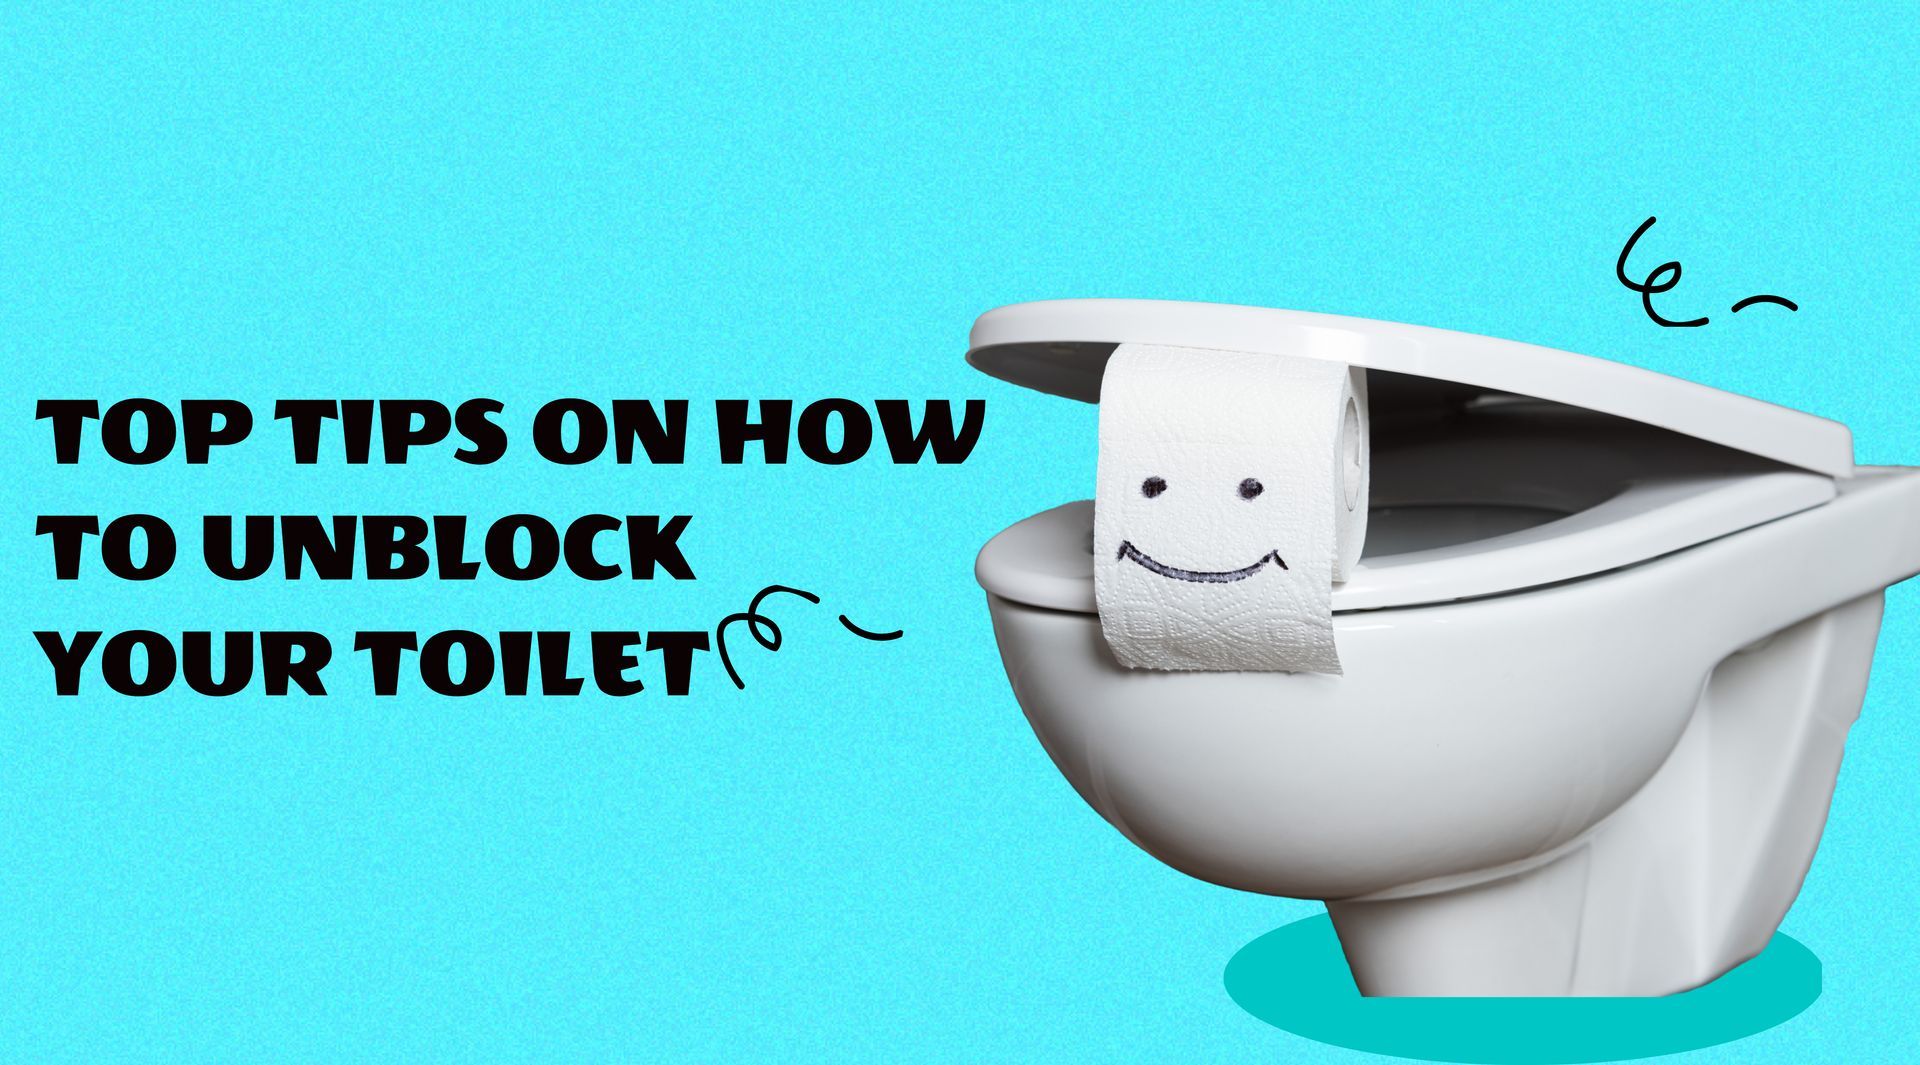 How to Unblock a Badly Blocked Toilet